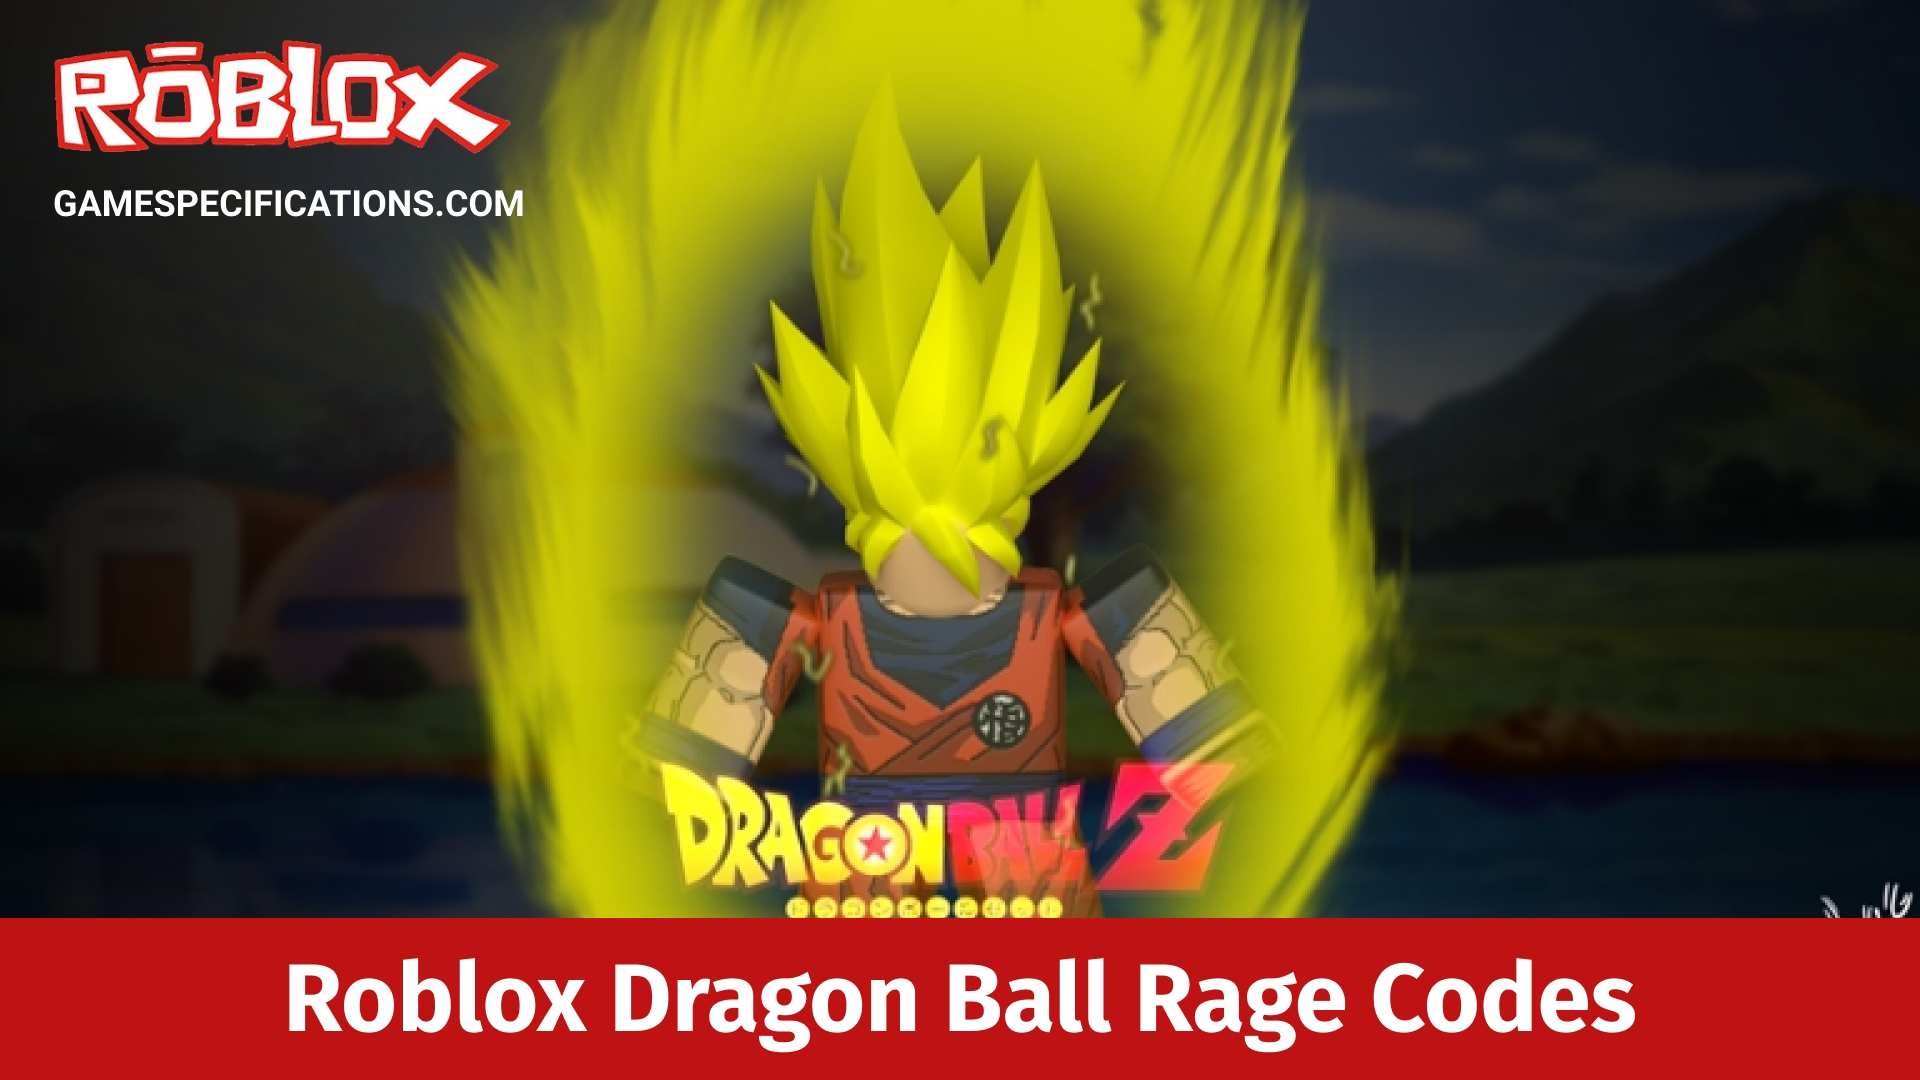 Roblox Dragon Ball Rage Codes July 2021 Game Specifications - roblox rage id